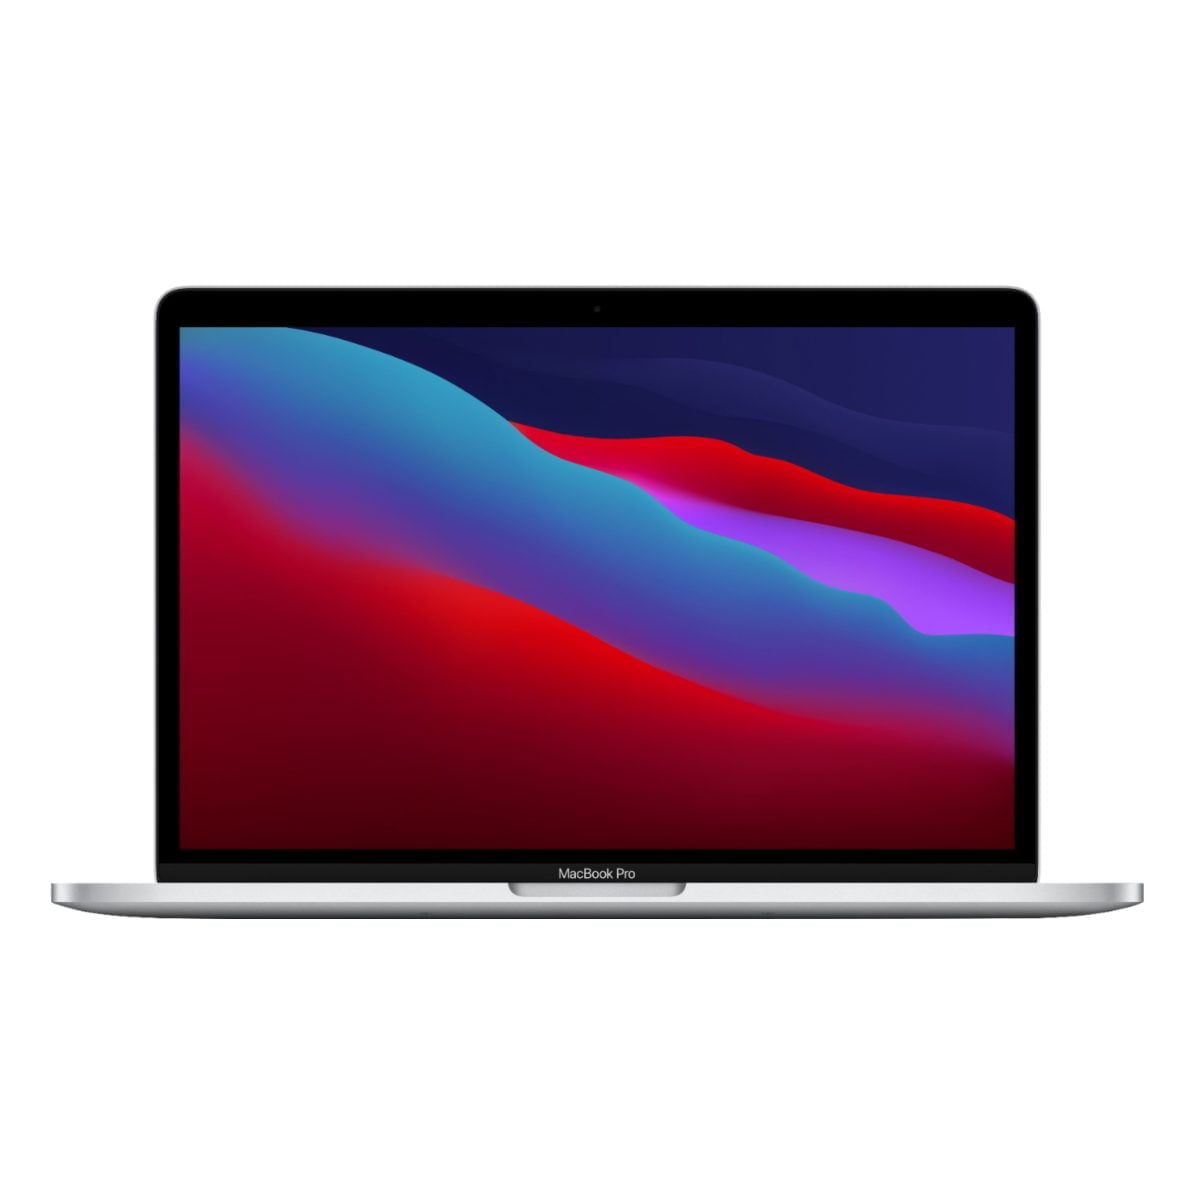 6418602 Sd Scaled Apple &Amp;Lt;H1 Class=&Amp;Quot;A-Size-Large A-Spacing-None&Amp;Quot;&Amp;Gt;Macbook Pro 13.3&Amp;Quot; Laptop - Apple M1 Chip - 8Gb Memory - 256Gb Ssd (Latest Model) - Silver (English Keyboard)&Amp;Lt;/H1&Amp;Gt; Https://Www.youtube.com/Watch?V=1Yvf-N__Jkk &Amp;Lt;P Class=&Amp;Quot;Heading-5 V-Fw-Regular Description-Heading&Amp;Quot;&Amp;Gt;&Amp;Lt;Span Style=&Amp;Quot;Color: #333333;Font-Size: 16Px&Amp;Quot;&Amp;Gt;The Apple M1 Chip Redefines The 13-Inch Macbook Pro. Featuring An 8-Core Cpu That Flies Through Complex Workflows In Photography, Coding, Video Editing, And More. Incredible 8-Core Gpu That Crushes Graphics-Intensive Tasks And Enables Super-Smooth Gaming. An Advanced 16-Core Neural Engine For More Machine Learning Power In Your Favorite Apps. Superfast Unified Memory For Fluid Performance. And The Longest-Ever Battery Life In A Mac At Up To 20 Hours.² It’s Apple'S Most Popular Pro Notebook. Way More Performance And Way More Pro.&Amp;Lt;/Span&Amp;Gt;&Amp;Lt;/P&Amp;Gt; Apple Macbook Pro 13 Apple Macbook Pro 13&Amp;Quot; Laptop - Apple M1 Chip - 8Gb Memory - 256Gb Ssd (Myda2) -Silver